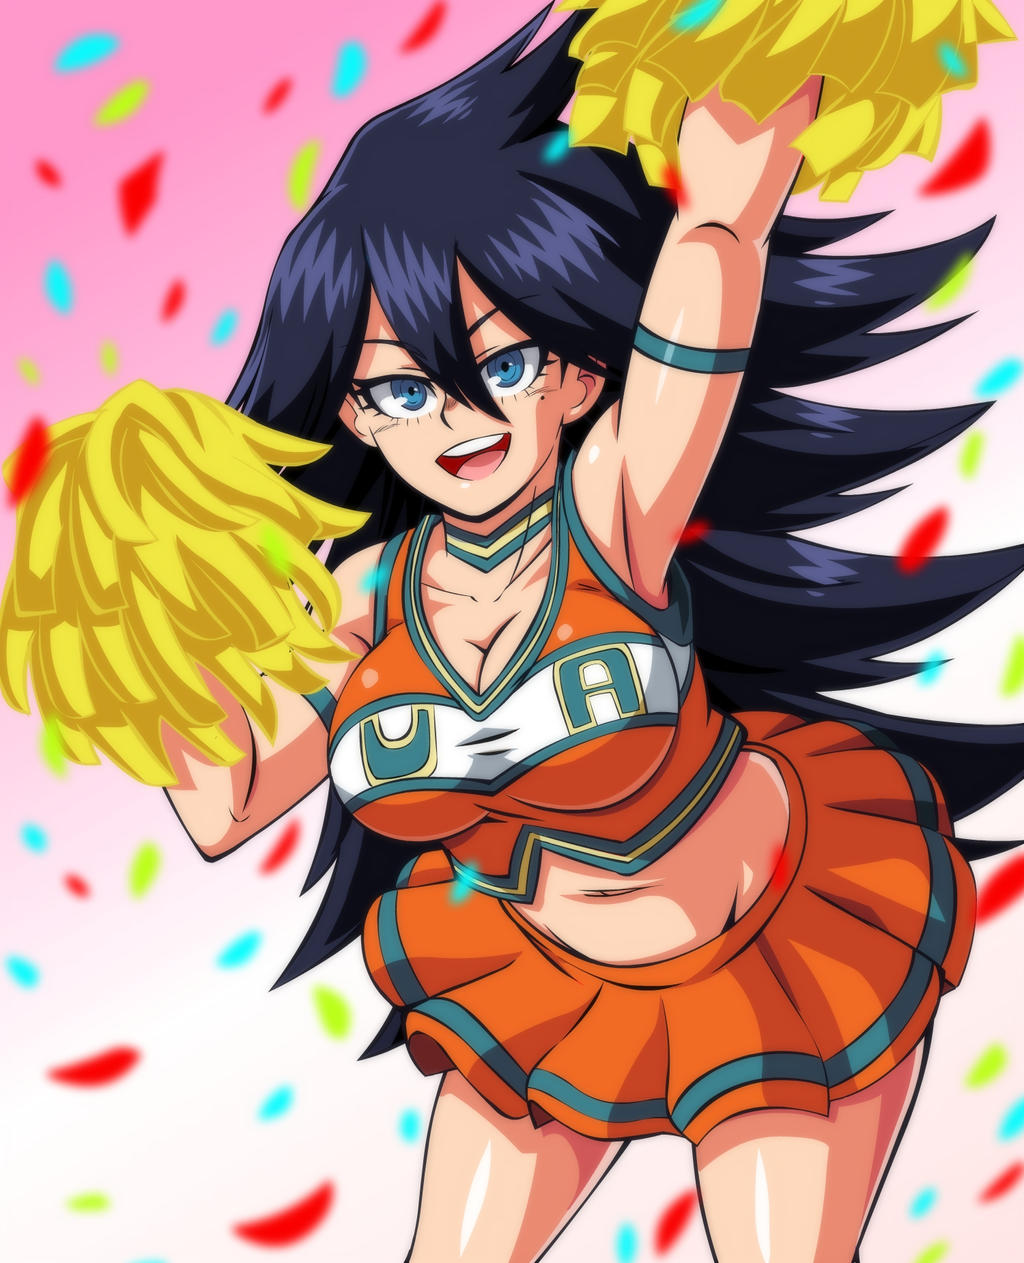 Bnha Cheerleader Outfit ~ The Road Goes Ever On And On Giblrisbox 